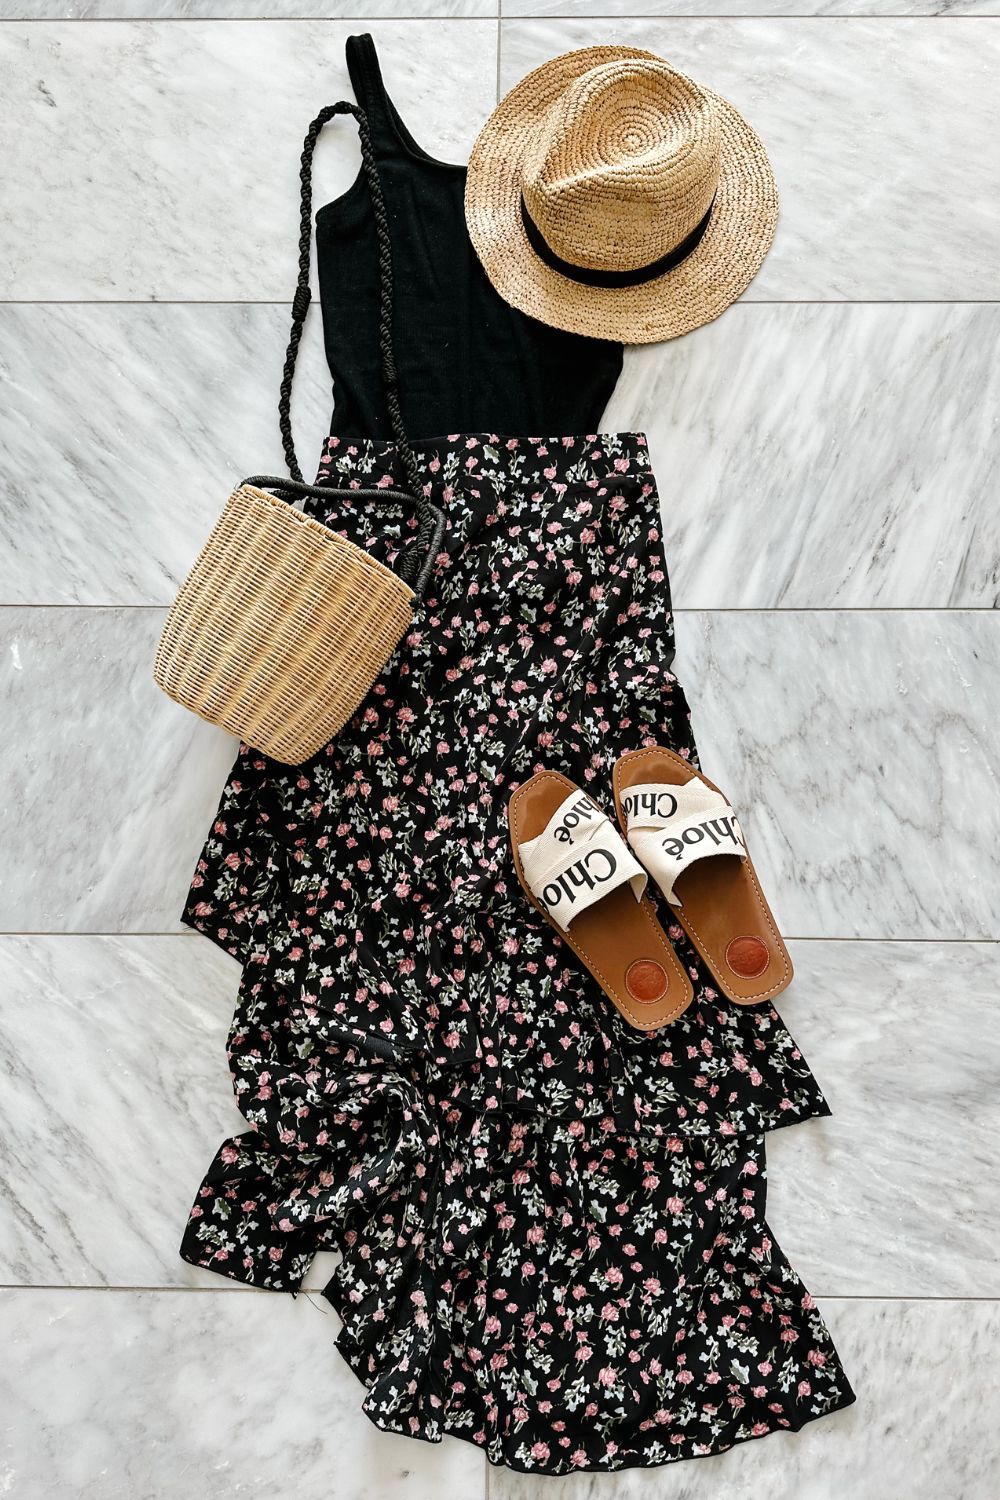 A tank top and floral midi skirt styled with a straw hat, straw bag, and sandals